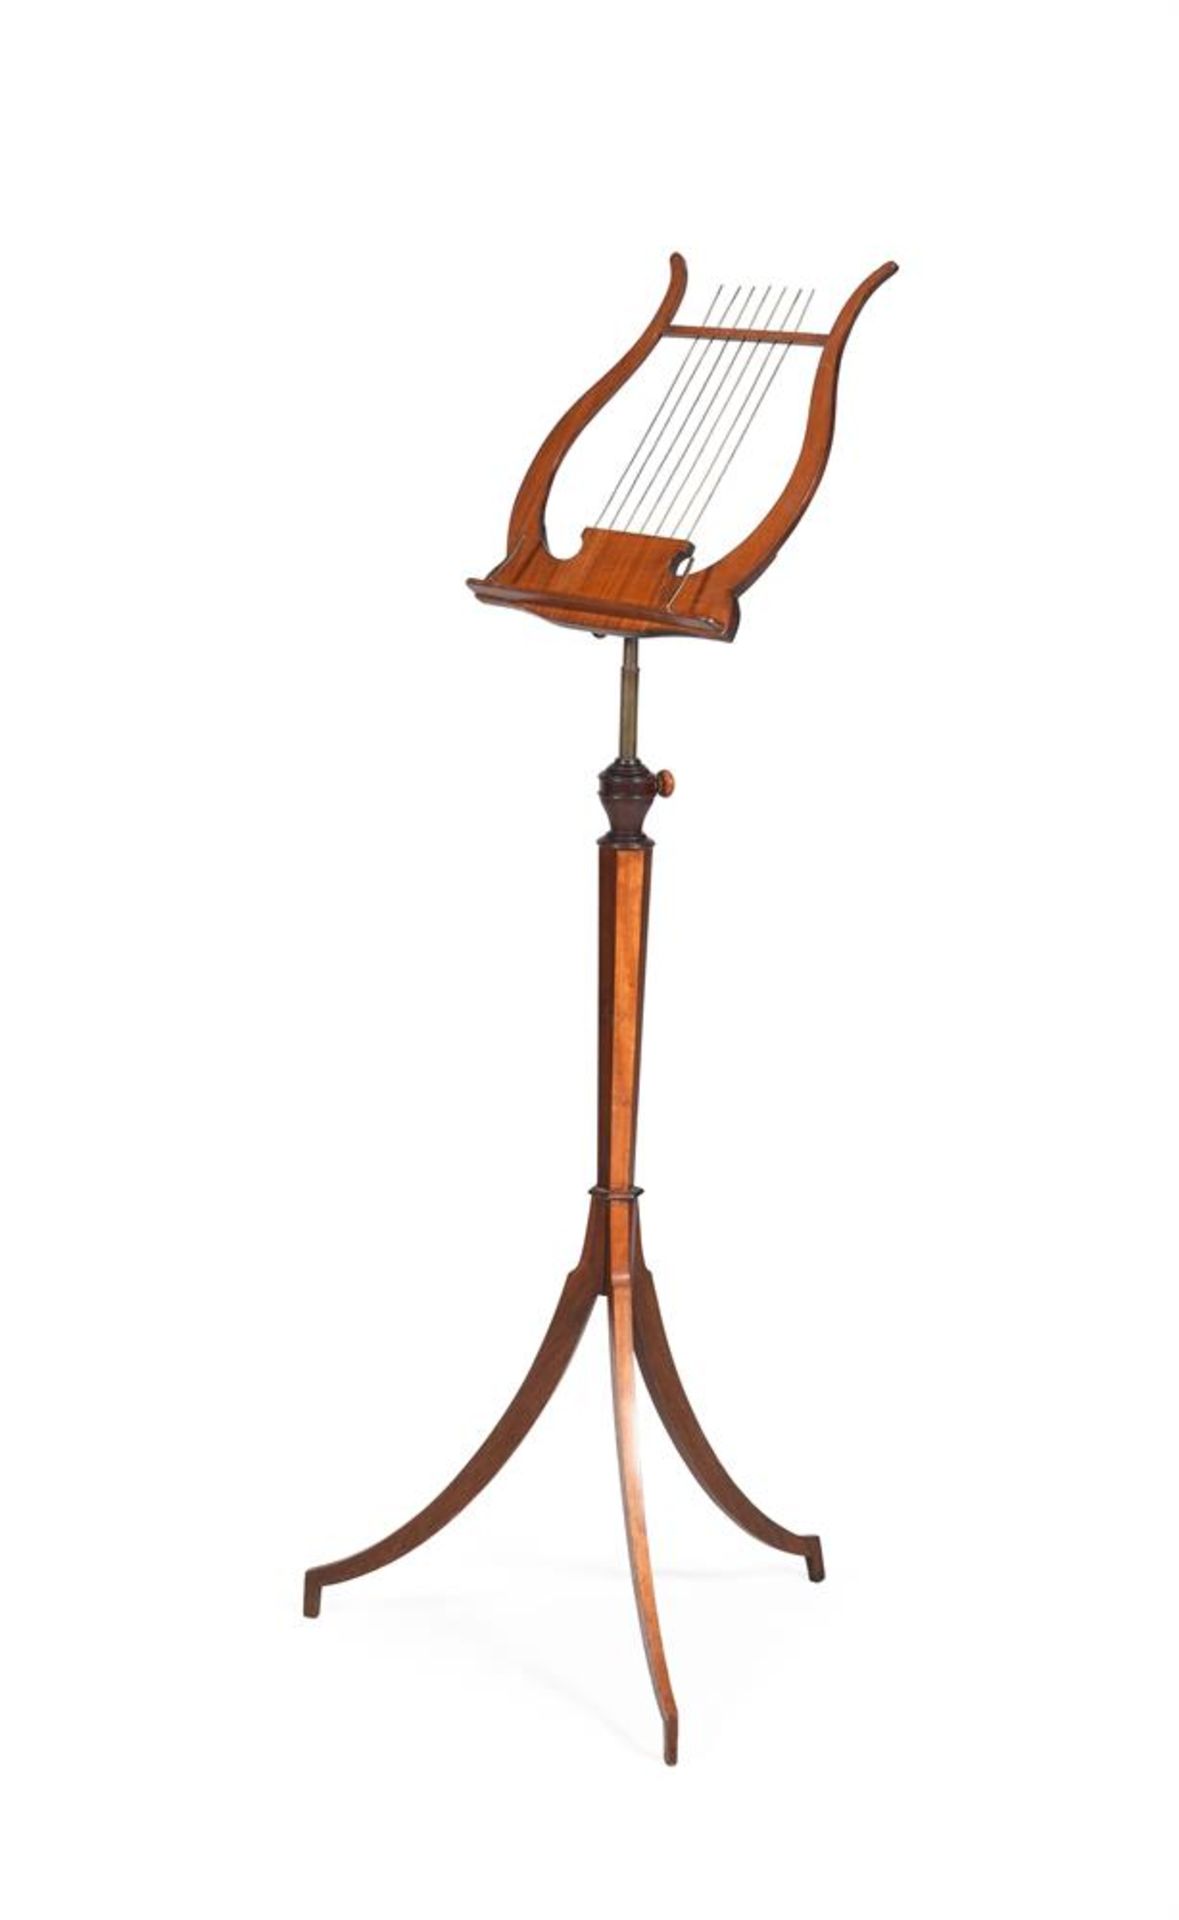 A LATE VICTORIAN SATINWOOD LYRE MUSIC STAND, LATE 19TH CENTURY